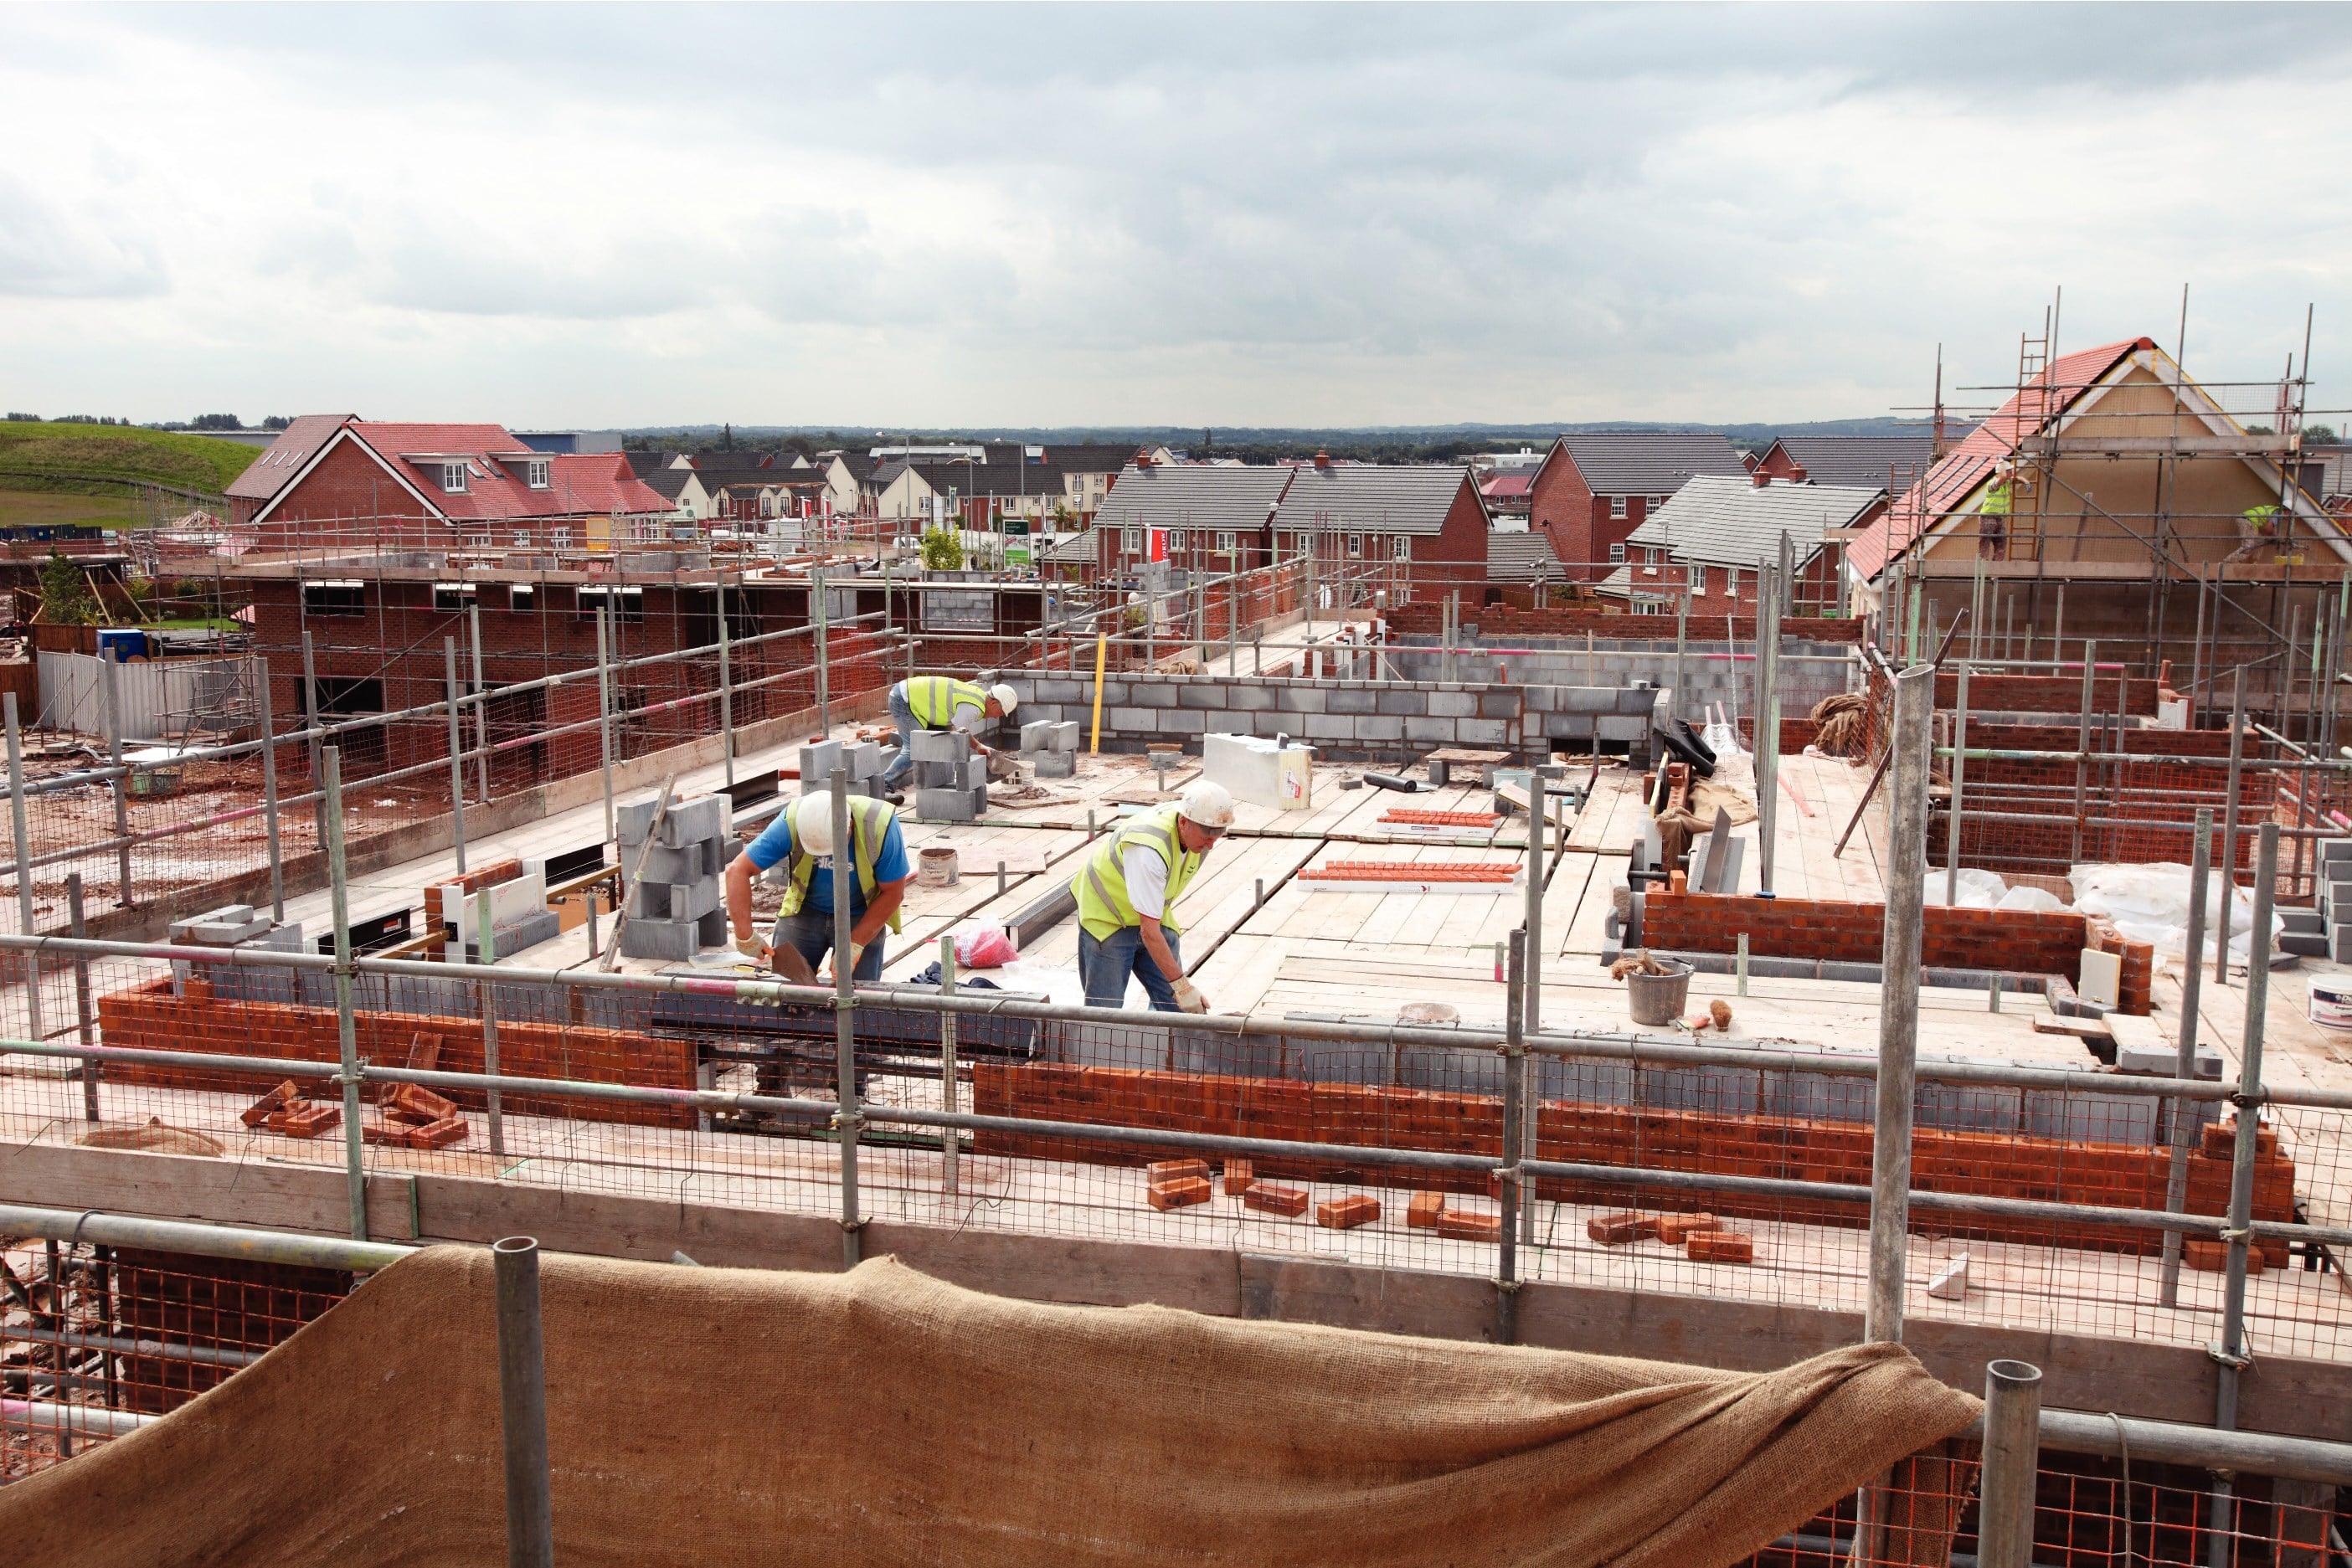 hbf-construction-work-on-a-redrow-site-m